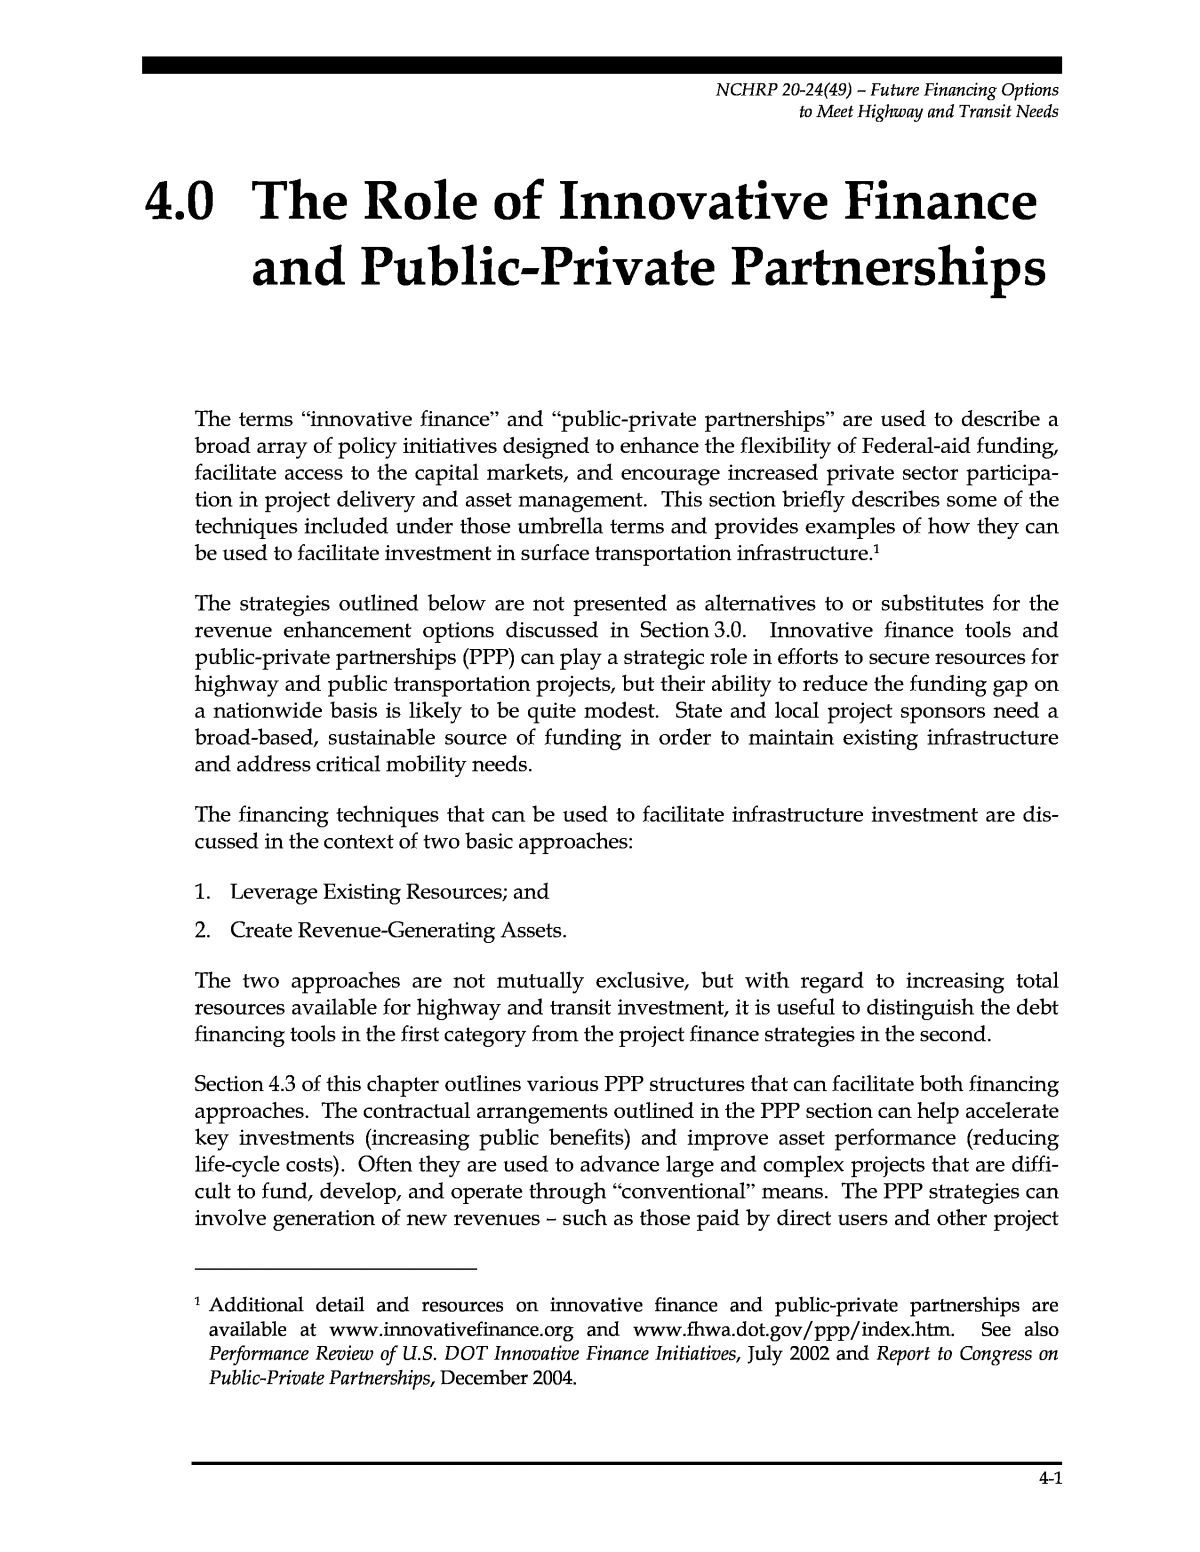 FHWA - Center for Innovative Finance Support - Project Profiles